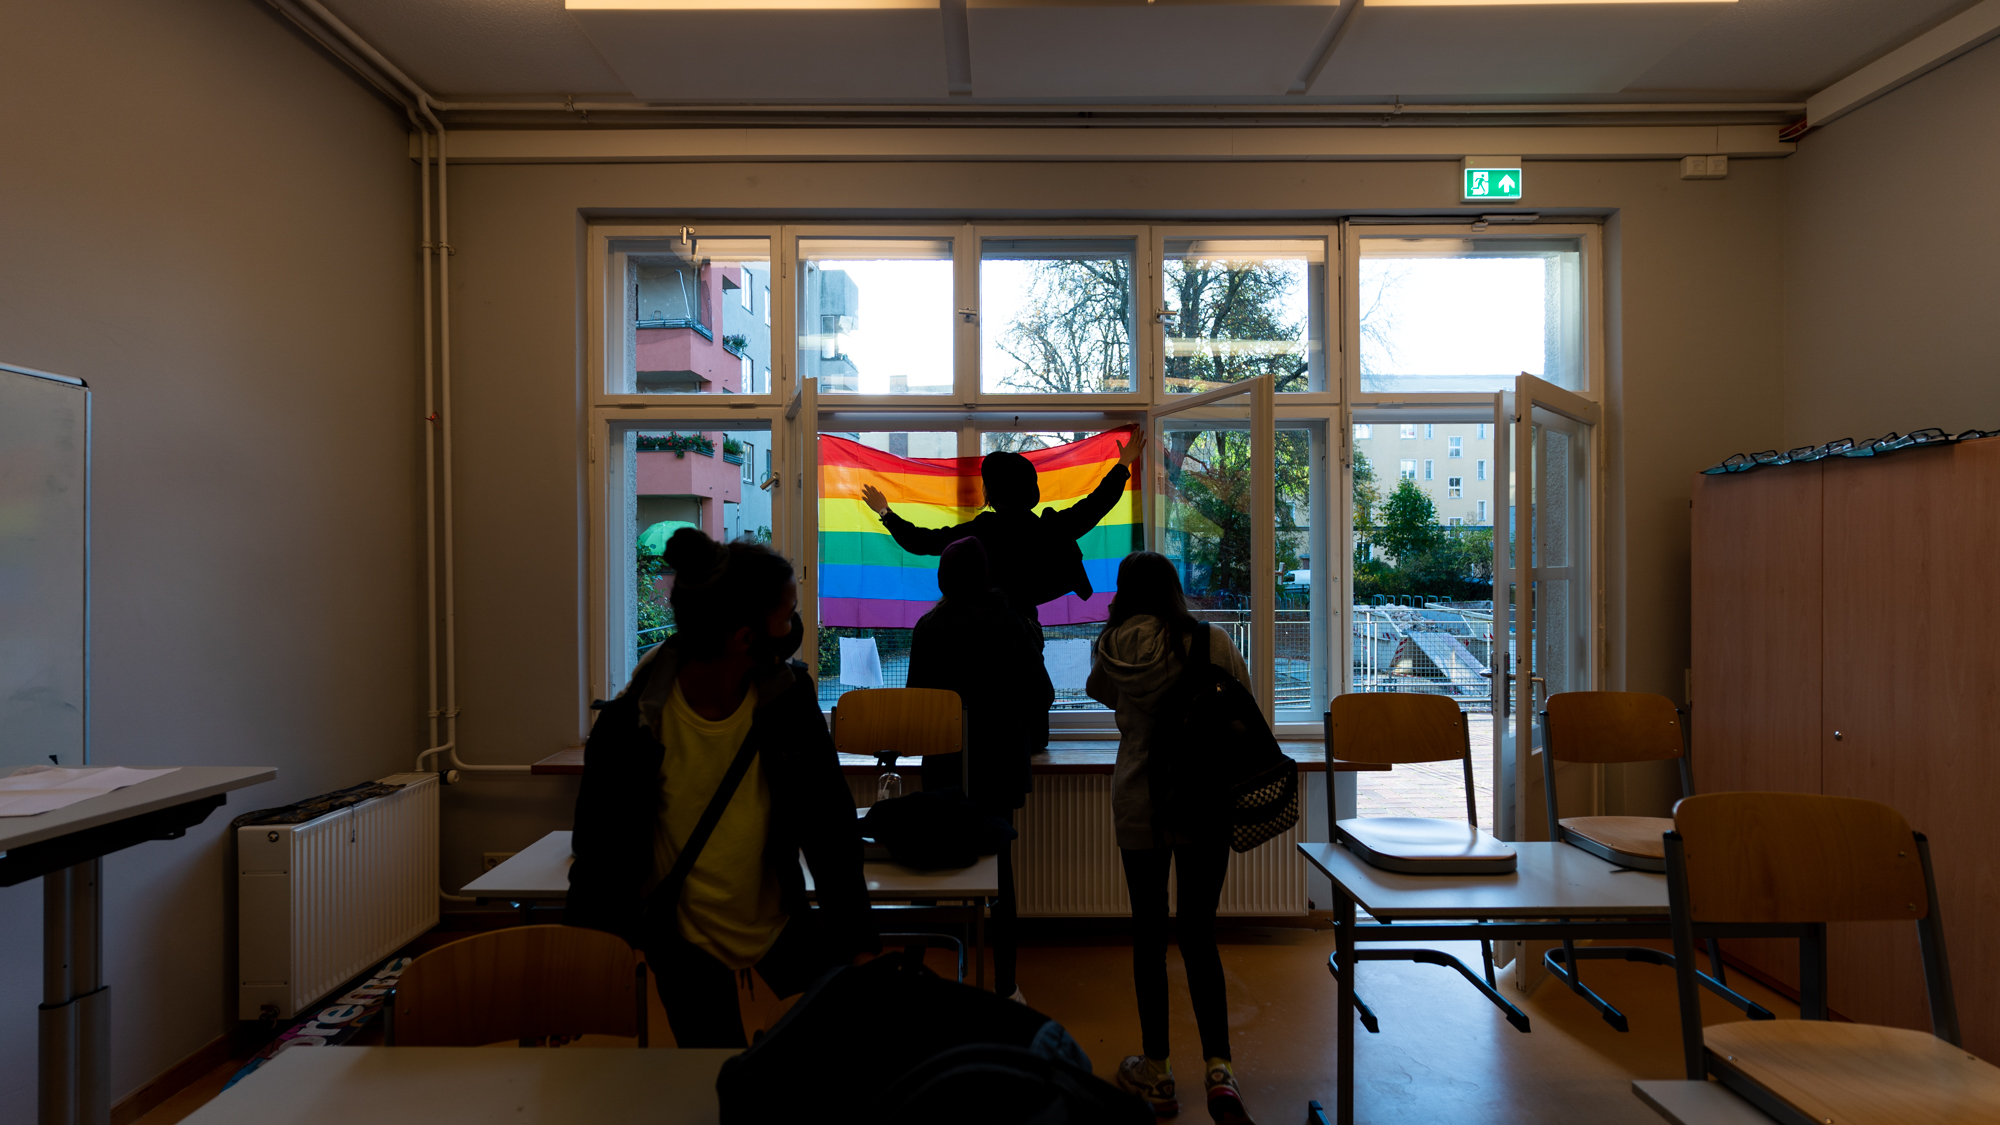 Secondary students attaching rainbow flag to window